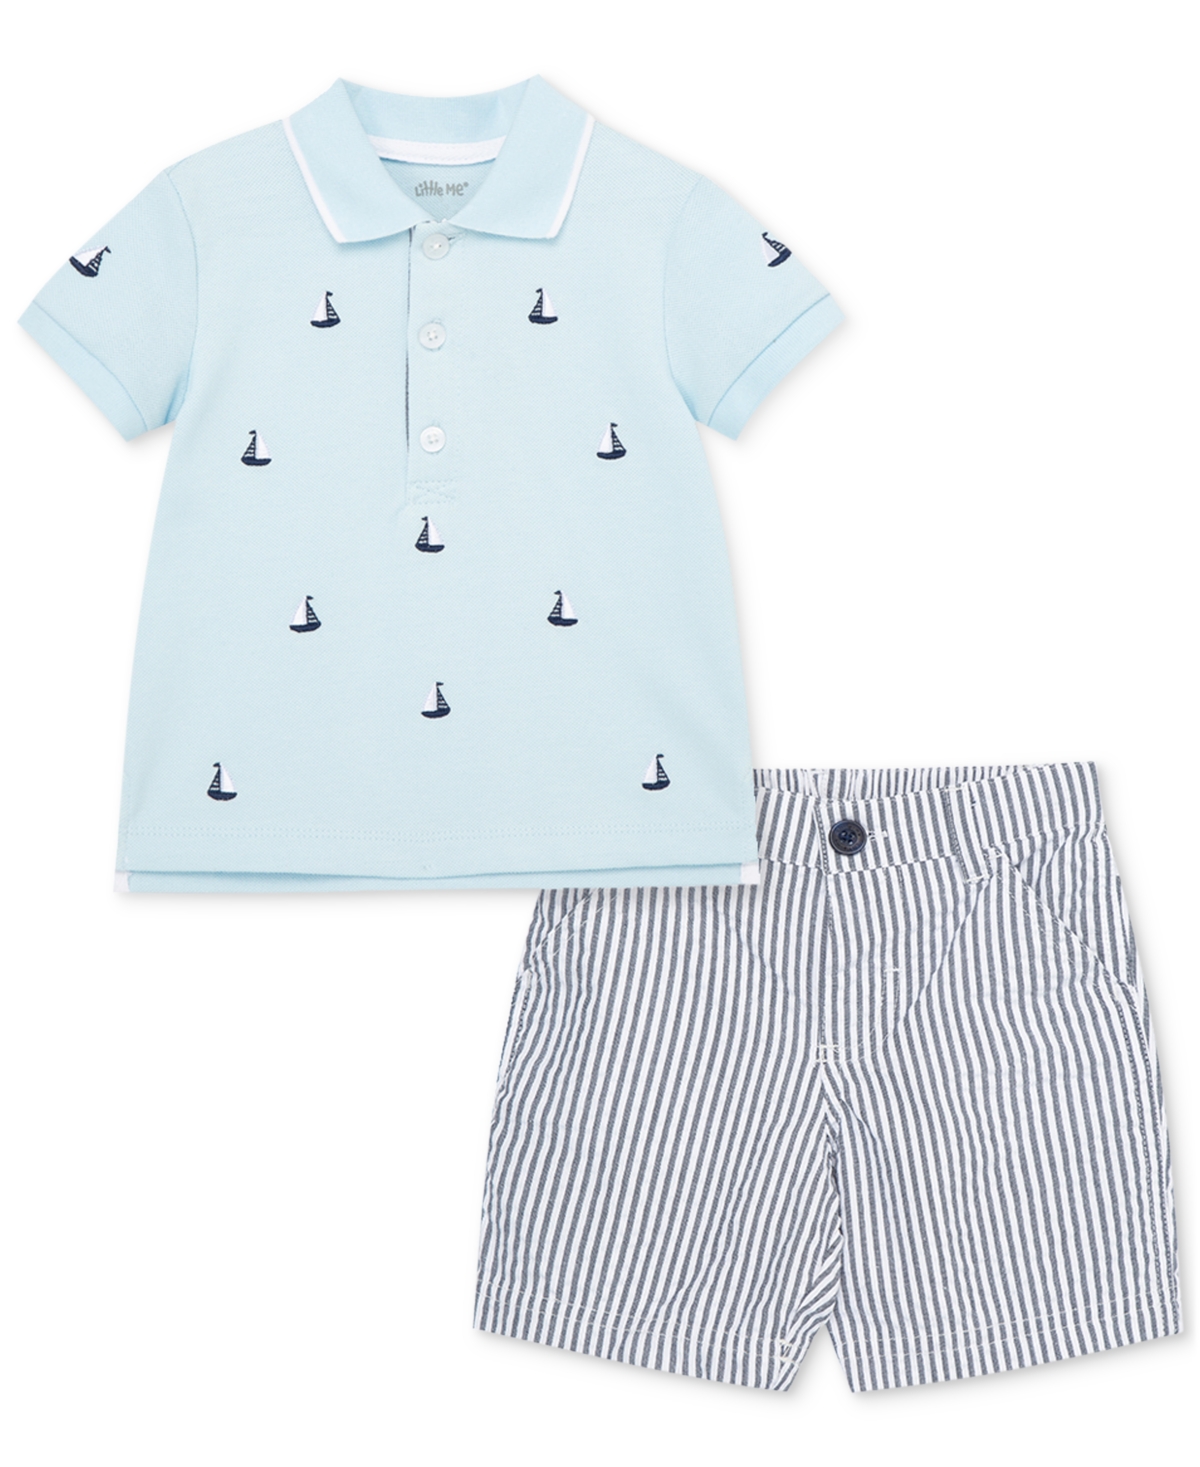 LITTLE ME BABY BOYS POLO SHIRT AND SHORTS, 2 PIECE SET